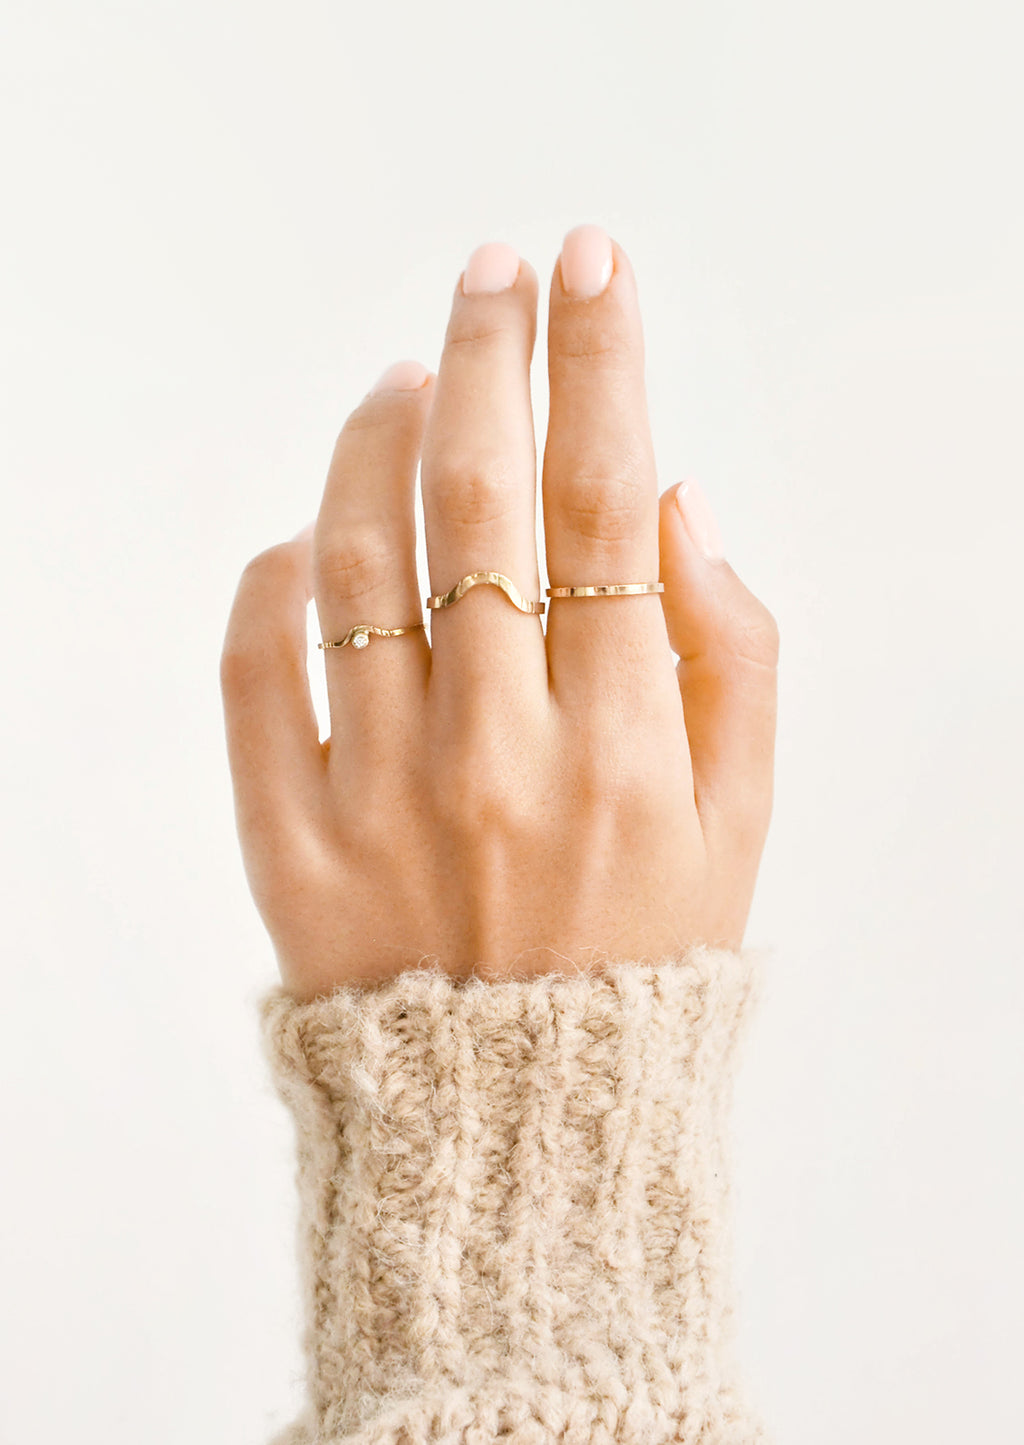 2: Model shot of hand wearing three styles of rings.